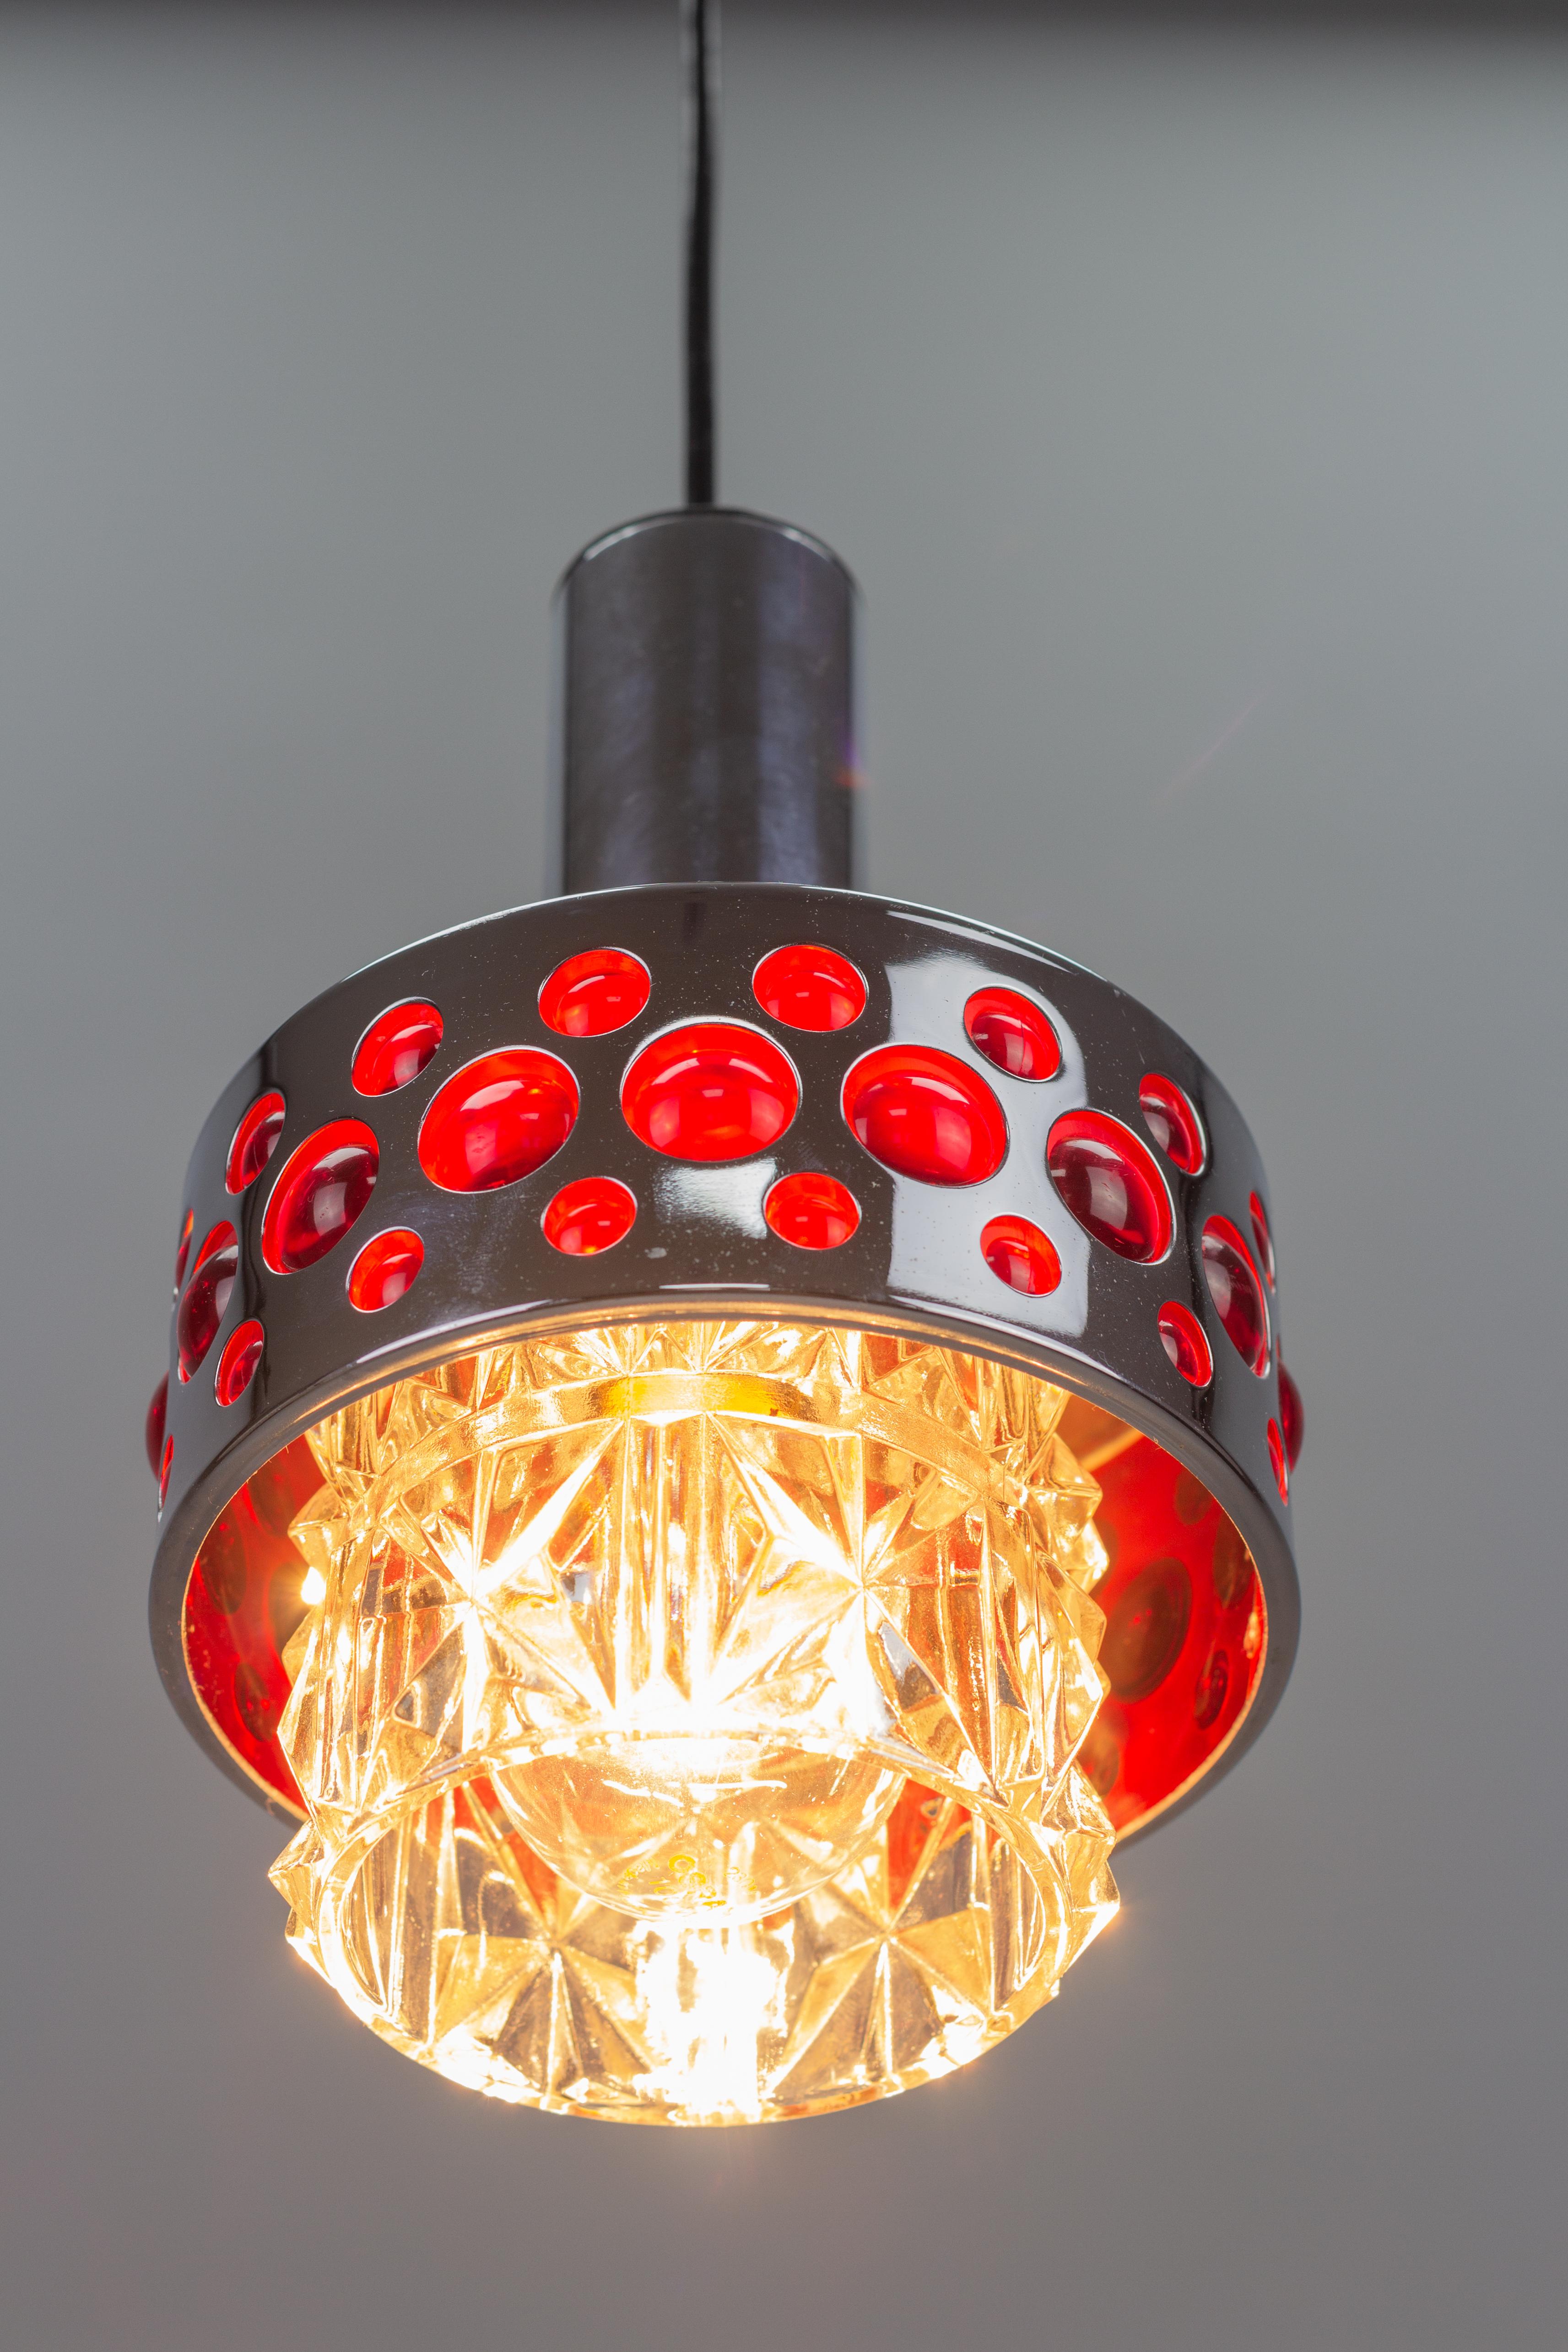 German Mid-Century Modern Chrome and Red Pendant Light by Richard Essig, 1970s For Sale 4